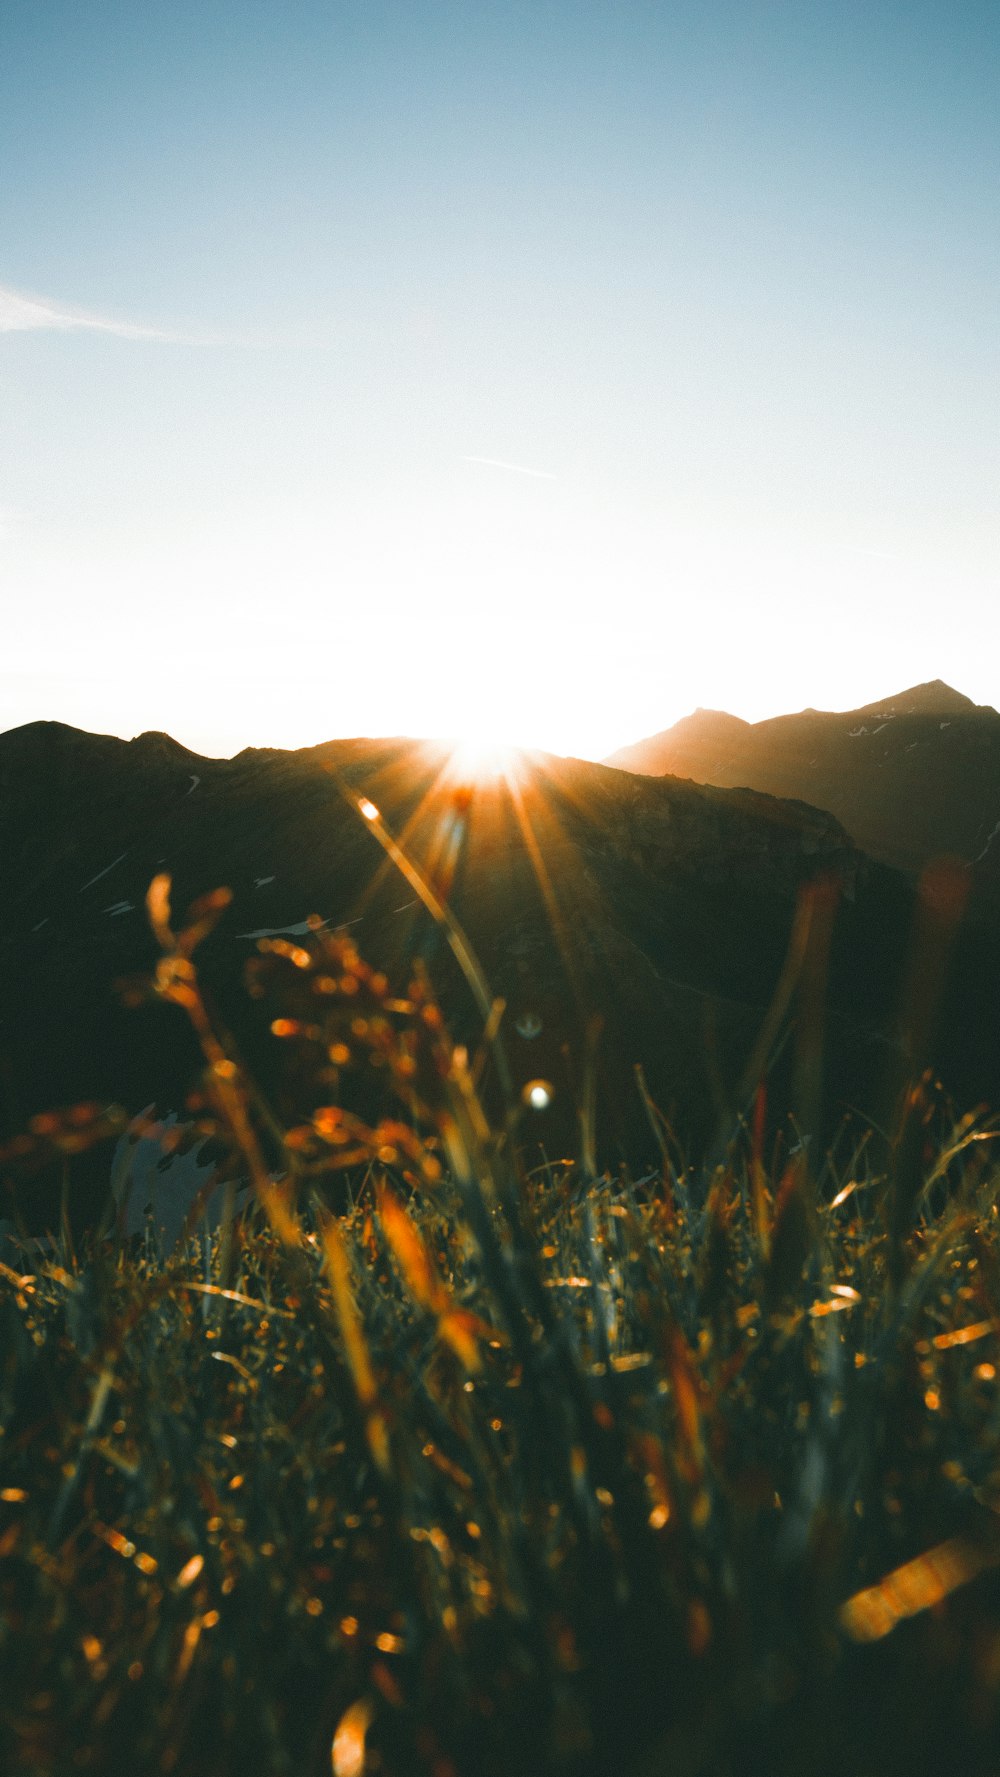 Morning Sun Pictures [HQ] | Download Free Images & Stock Photos on ...